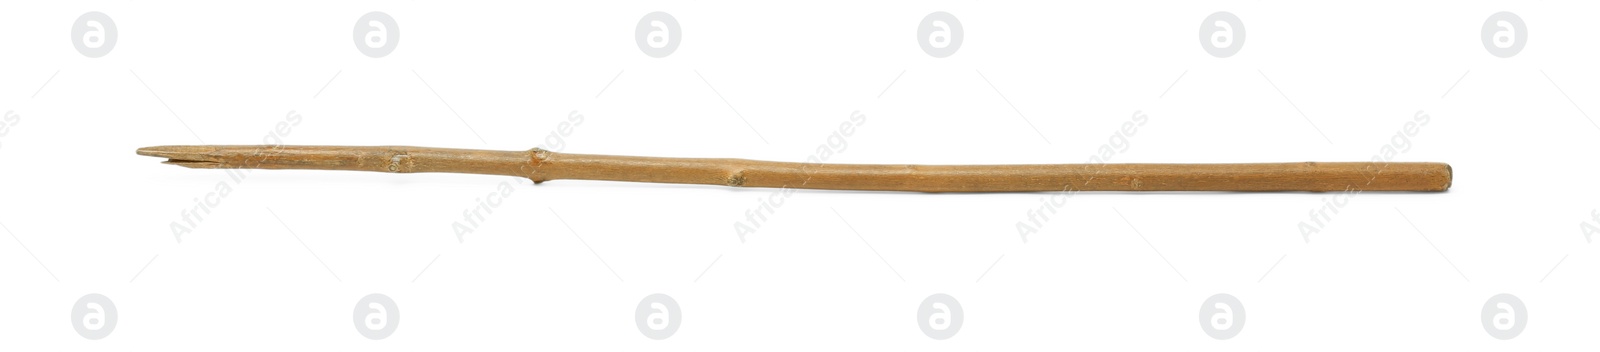 Photo of One old wooden stick isolated on white